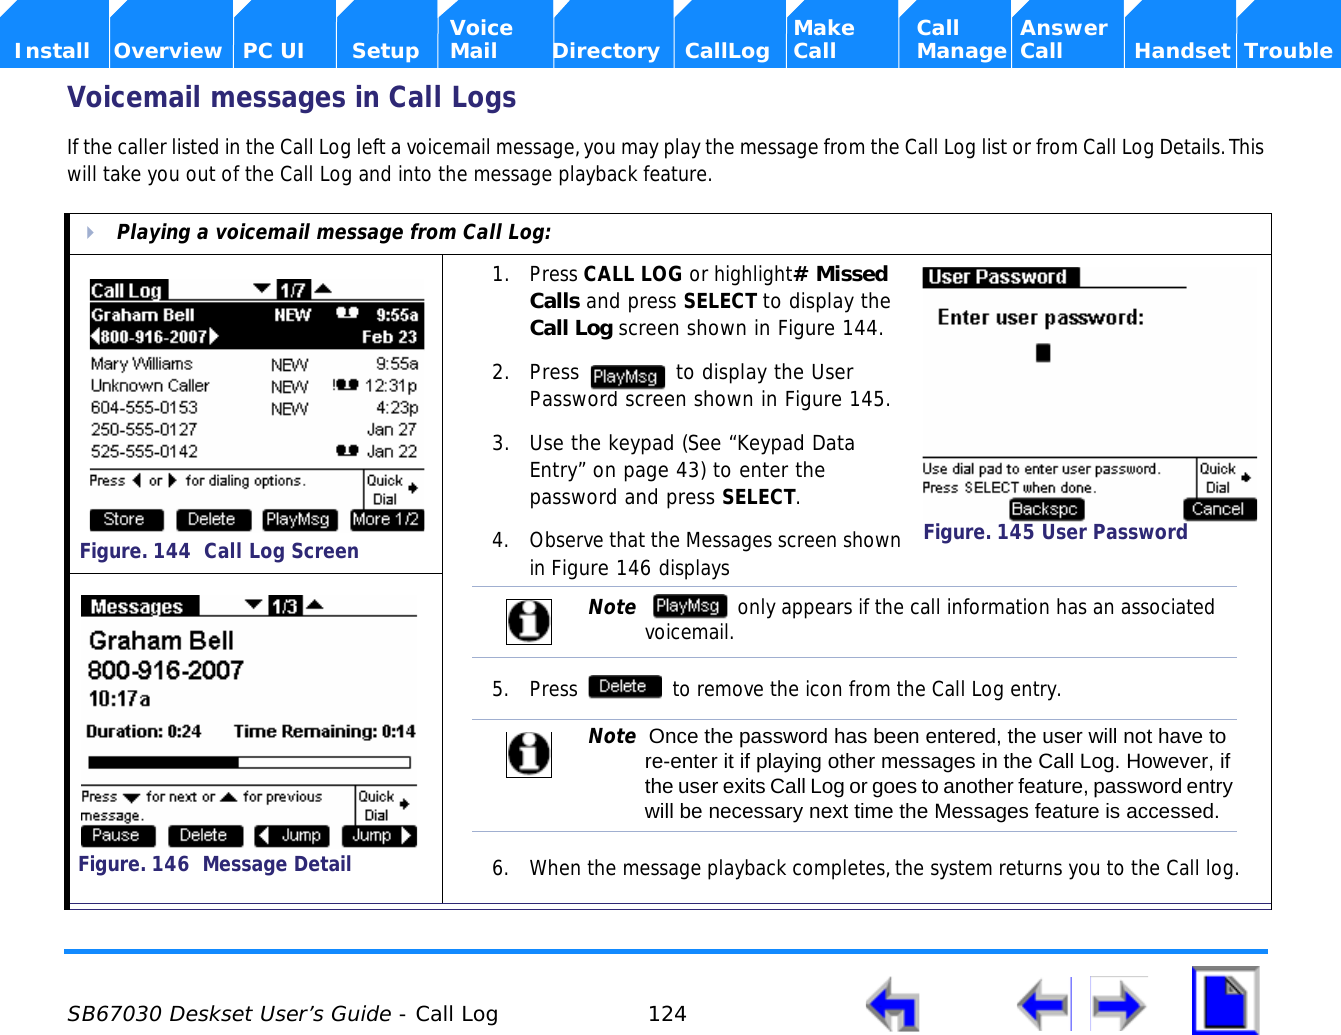  SB67030 Deskset User’s Guide - Call Log 124    Voice Make Call Answer  Install Overview PC UI Setup Mail Directory CallLog Call Manage Call Handset TroubleVoicemail messages in Call LogsIf the caller listed in the Call Log left a voicemail message, you may play the message from the Call Log list or from Call Log Details. This will take you out of the Call Log and into the message playback feature.Playing a voicemail message from Call Log:1. Press CALL LOG or highlight# Missed Calls and press SELECT to display the Call Log screen shown in Figure 144.2. Press   to display the User Password screen shown in Figure 145.3. Use the keypad (See “Keypad Data Entry” on page 43) to enter the password and press SELECT.4. Observe that the Messages screen shown in Figure 146 displays5. Press   to remove the icon from the Call Log entry.6. When the message playback completes, the system returns you to the Call log.Figure. 144  Call Log ScreenFigure. 145 User PasswordNote    only appears if the call information has an associated voicemail.Note  Once the password has been entered, the user will not have to re-enter it if playing other messages in the Call Log. However, if the user exits Call Log or goes to another feature, password entry will be necessary next time the Messages feature is accessed.Figure. 146  Message Detail